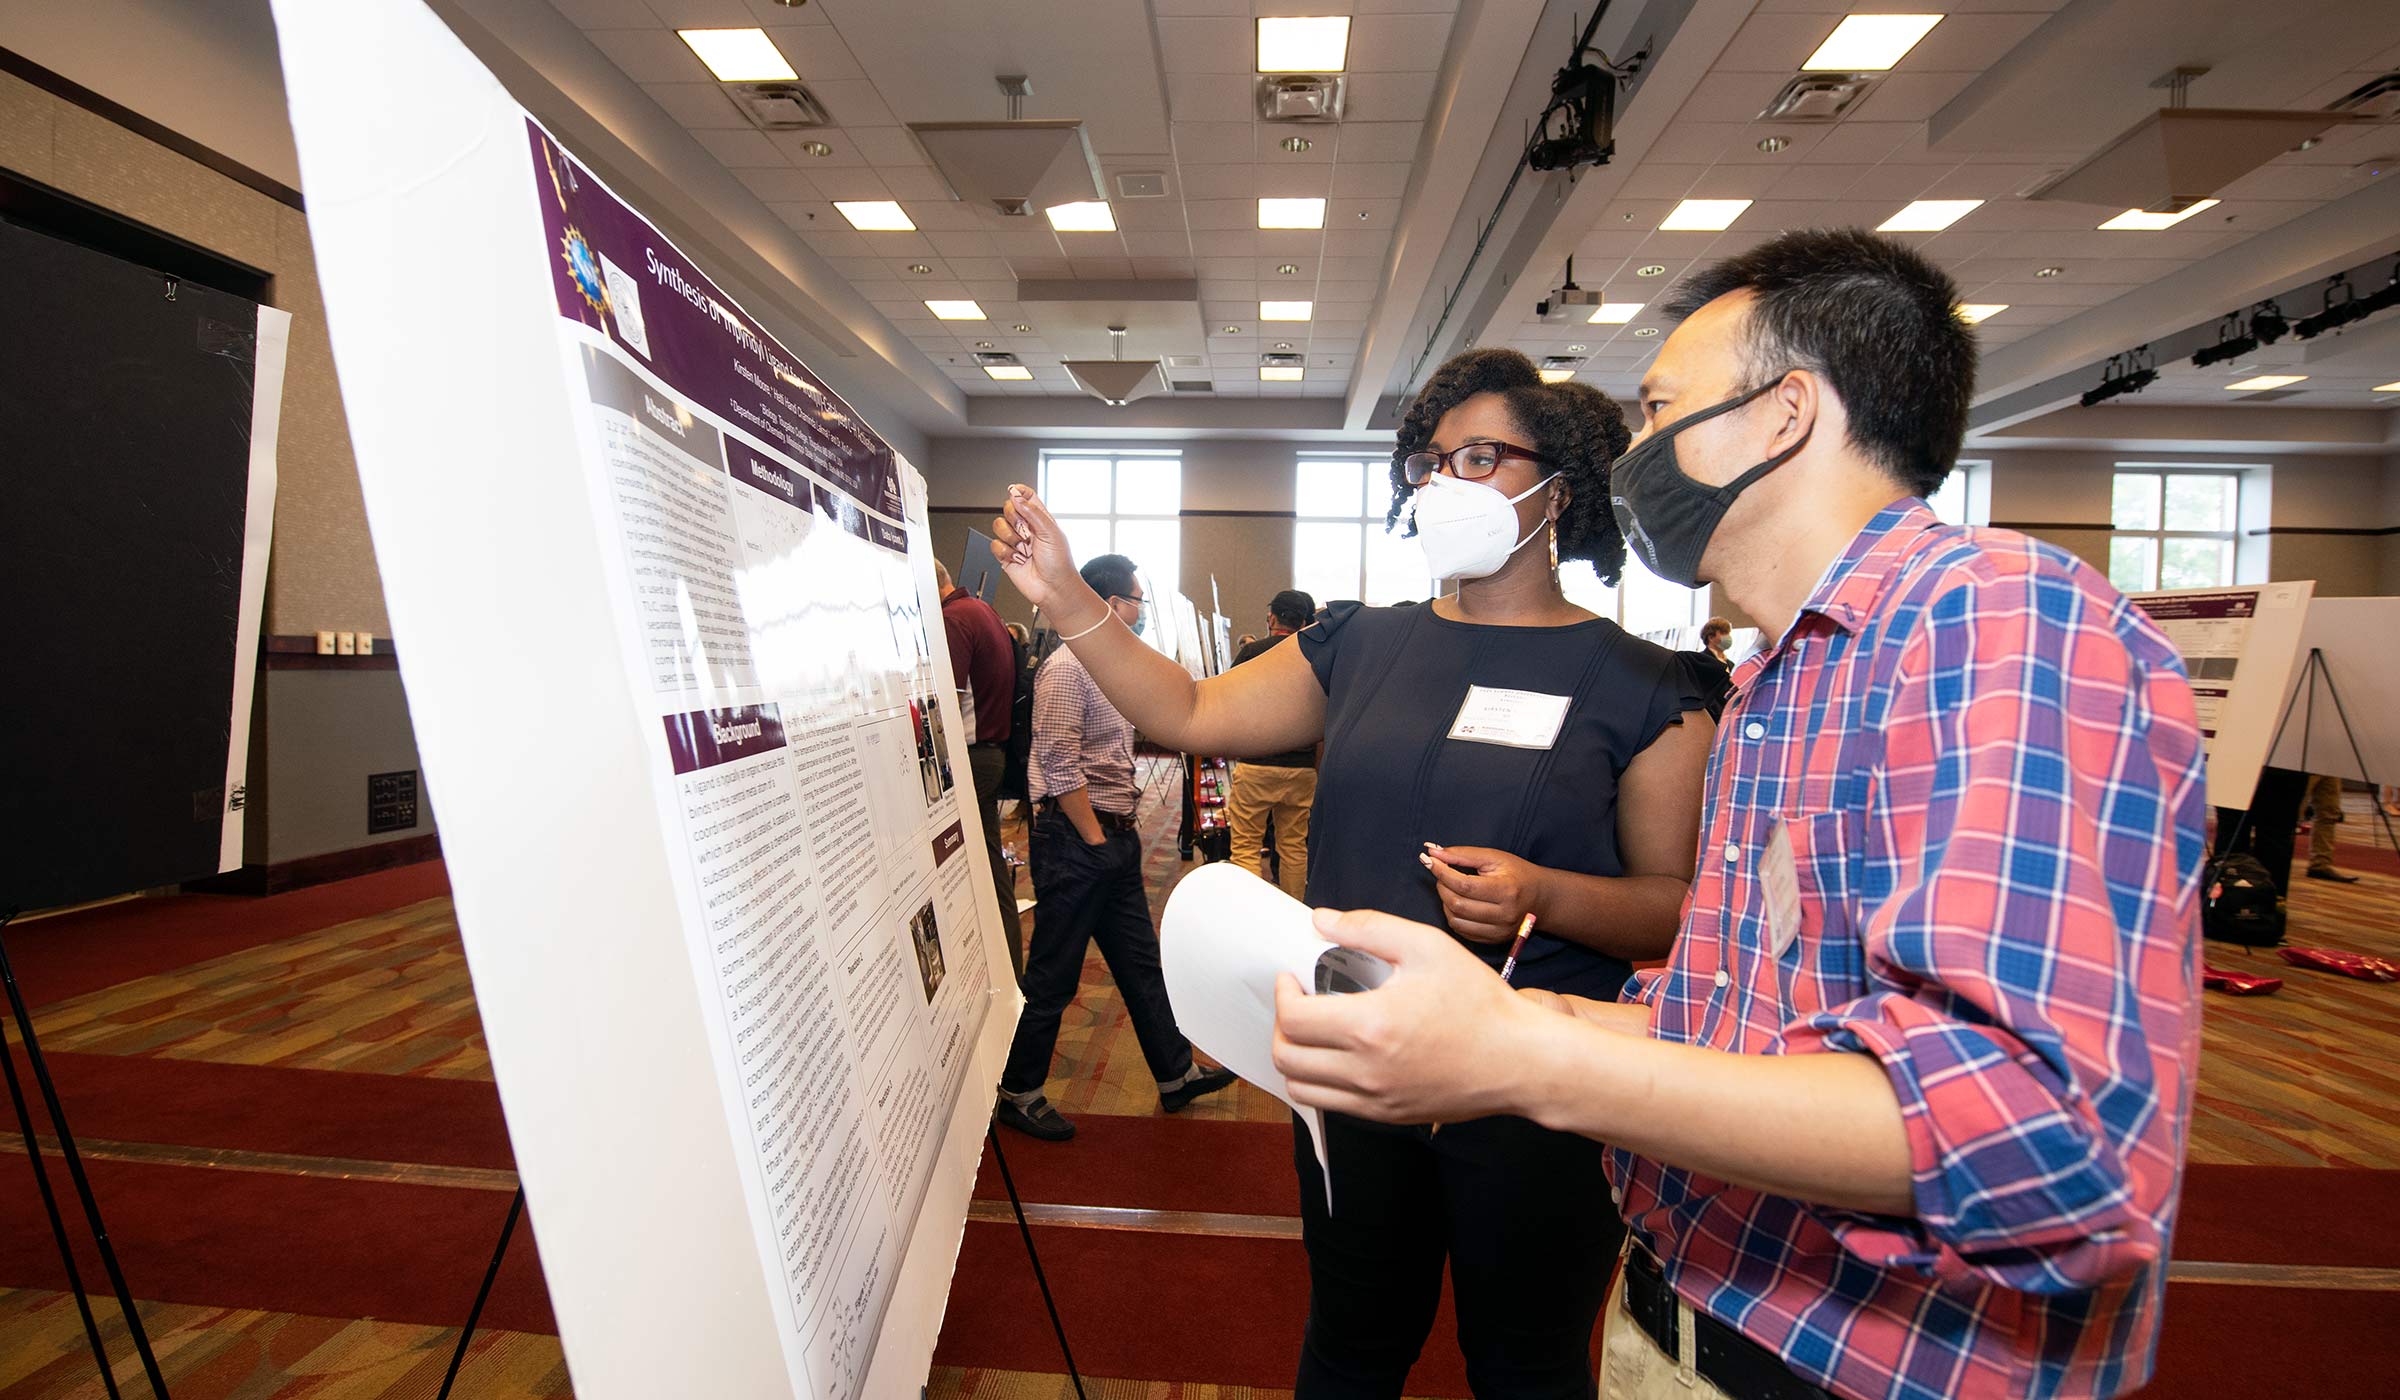 Female in dark attire and mask presenting research poster to a man in plaid shirt and mask